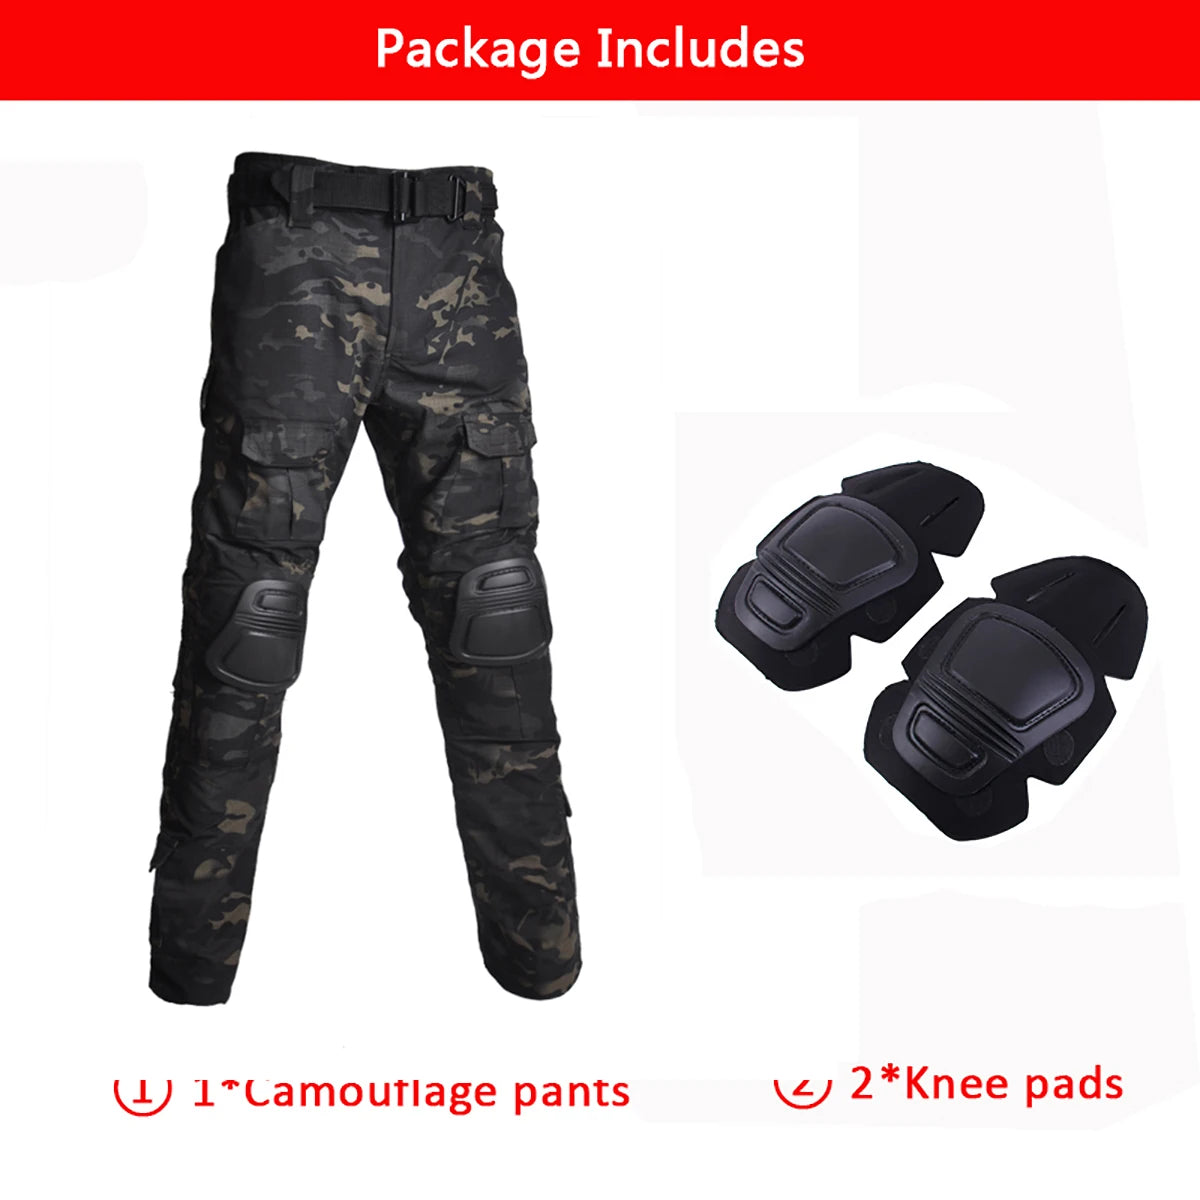 Multicam Camouflage Military Tactical Pants Army Wear-resistant Hiking Pant Paintball Combat Pant With Knee Pads Hunting Clothes black camo pants